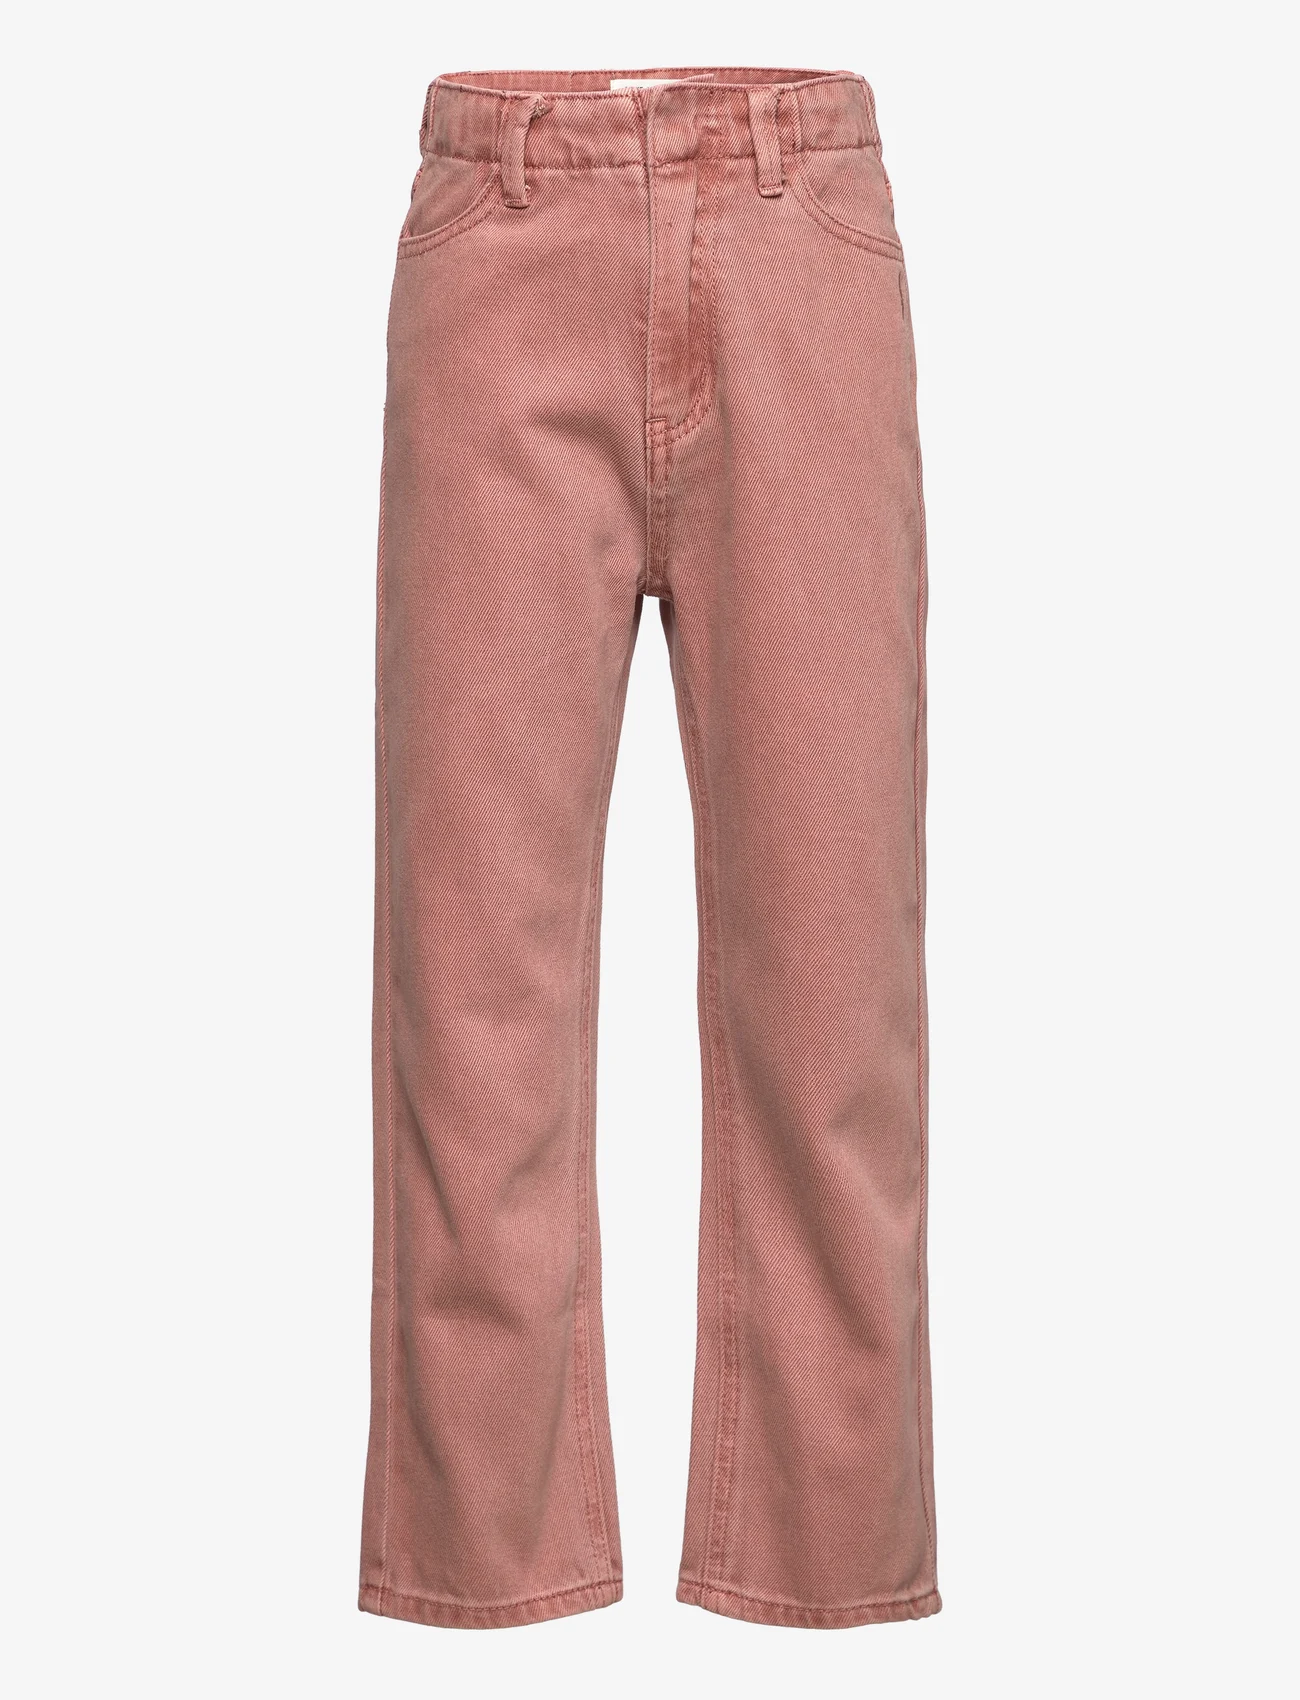 Sofie Schnoor Baby and Kids - G223214 - vide jeans - misty rose - 0